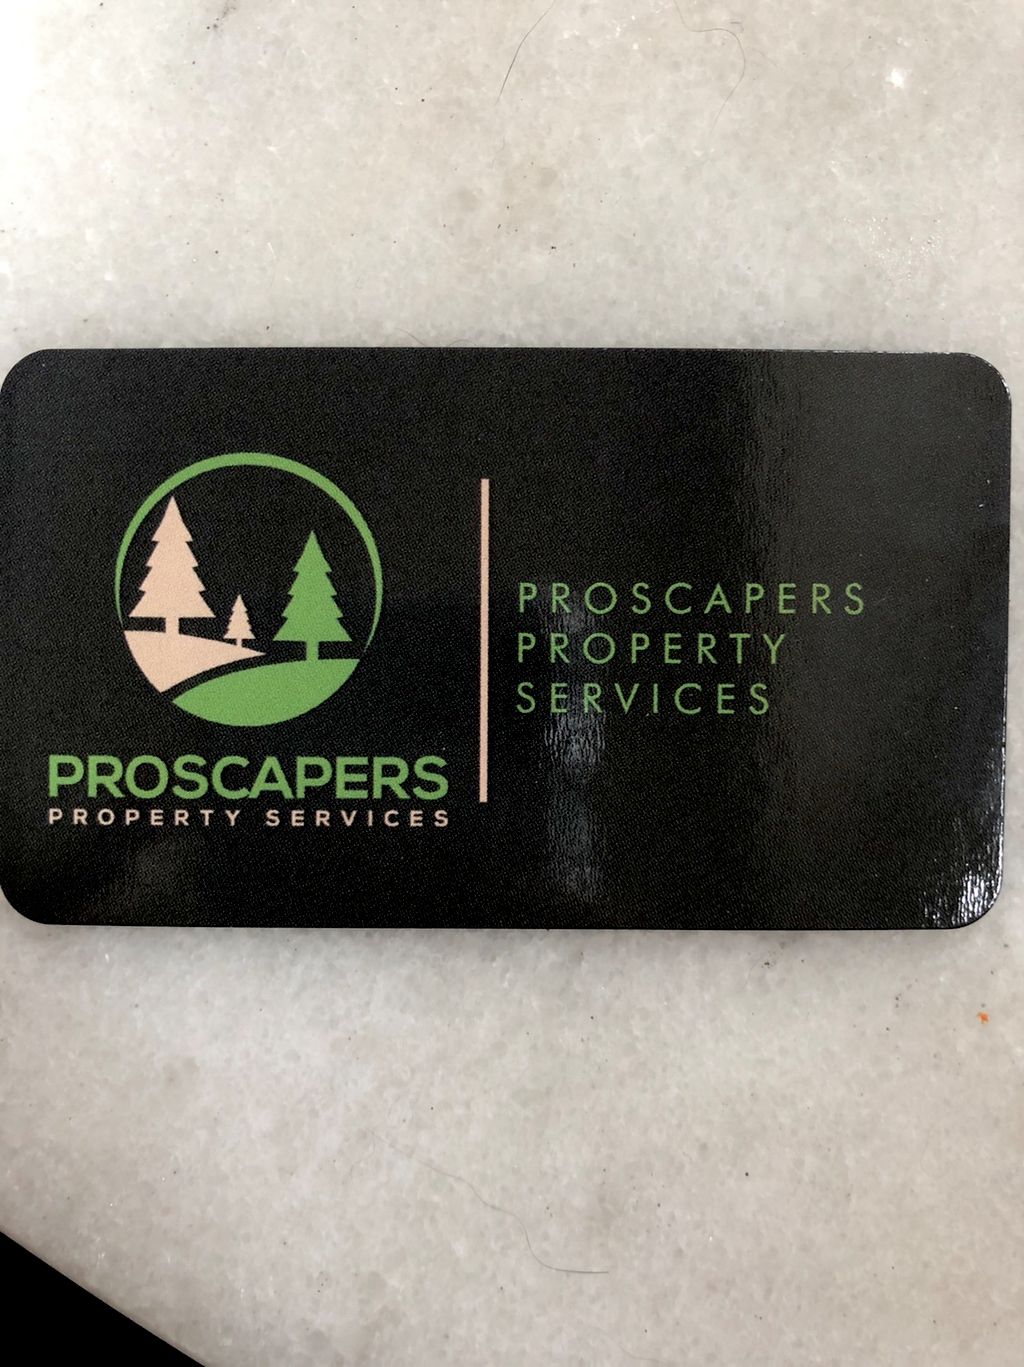 Proscapers property services